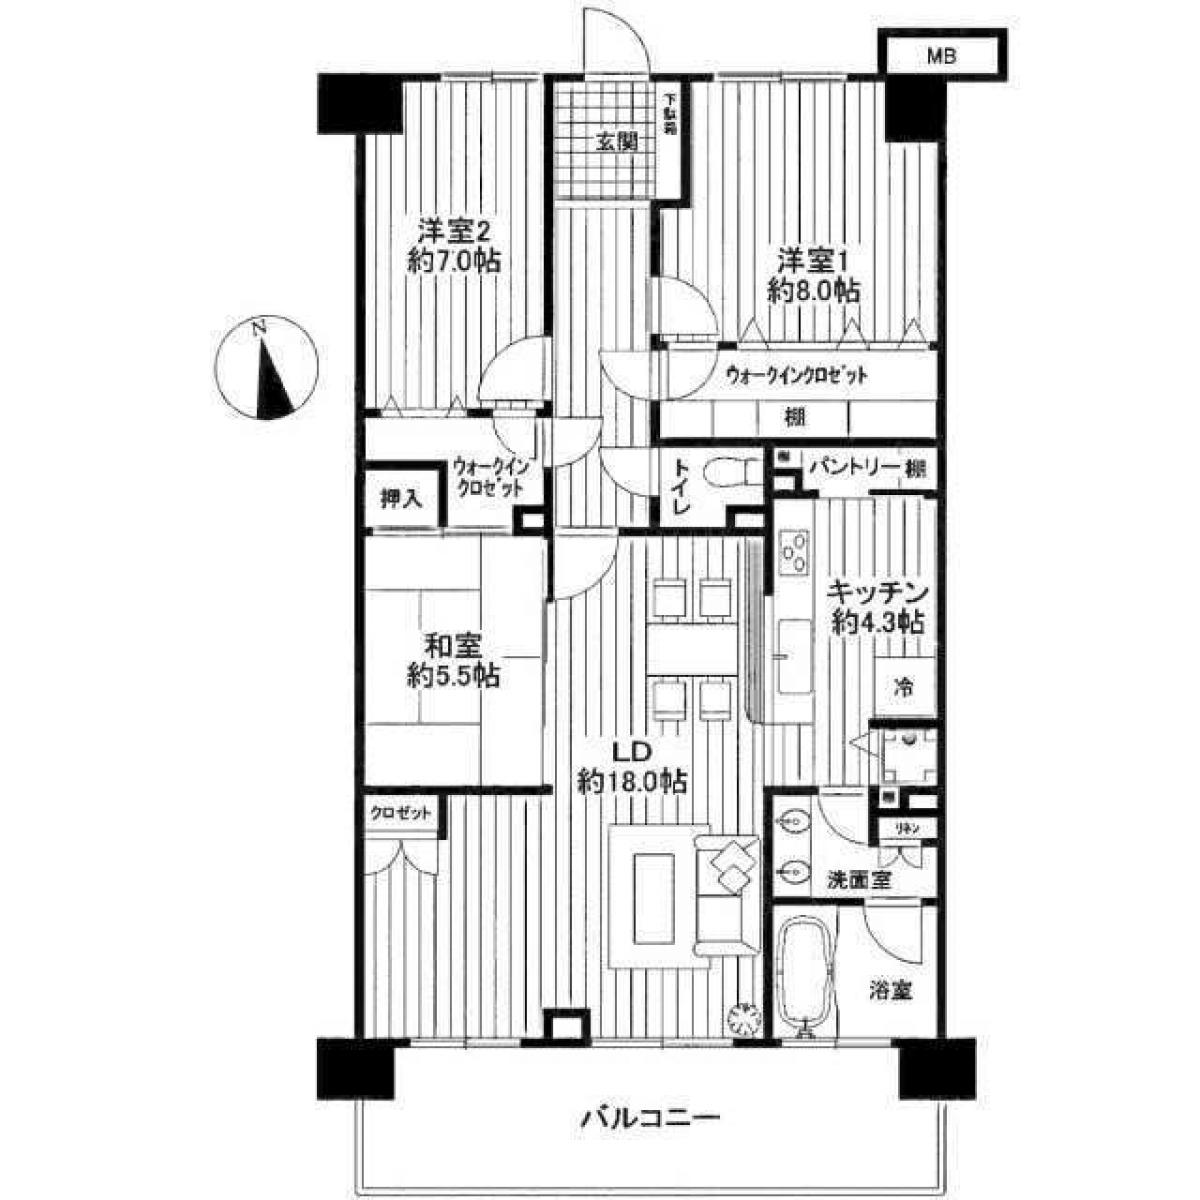 Picture of Apartment For Sale in Inzai Shi, Chiba, Japan